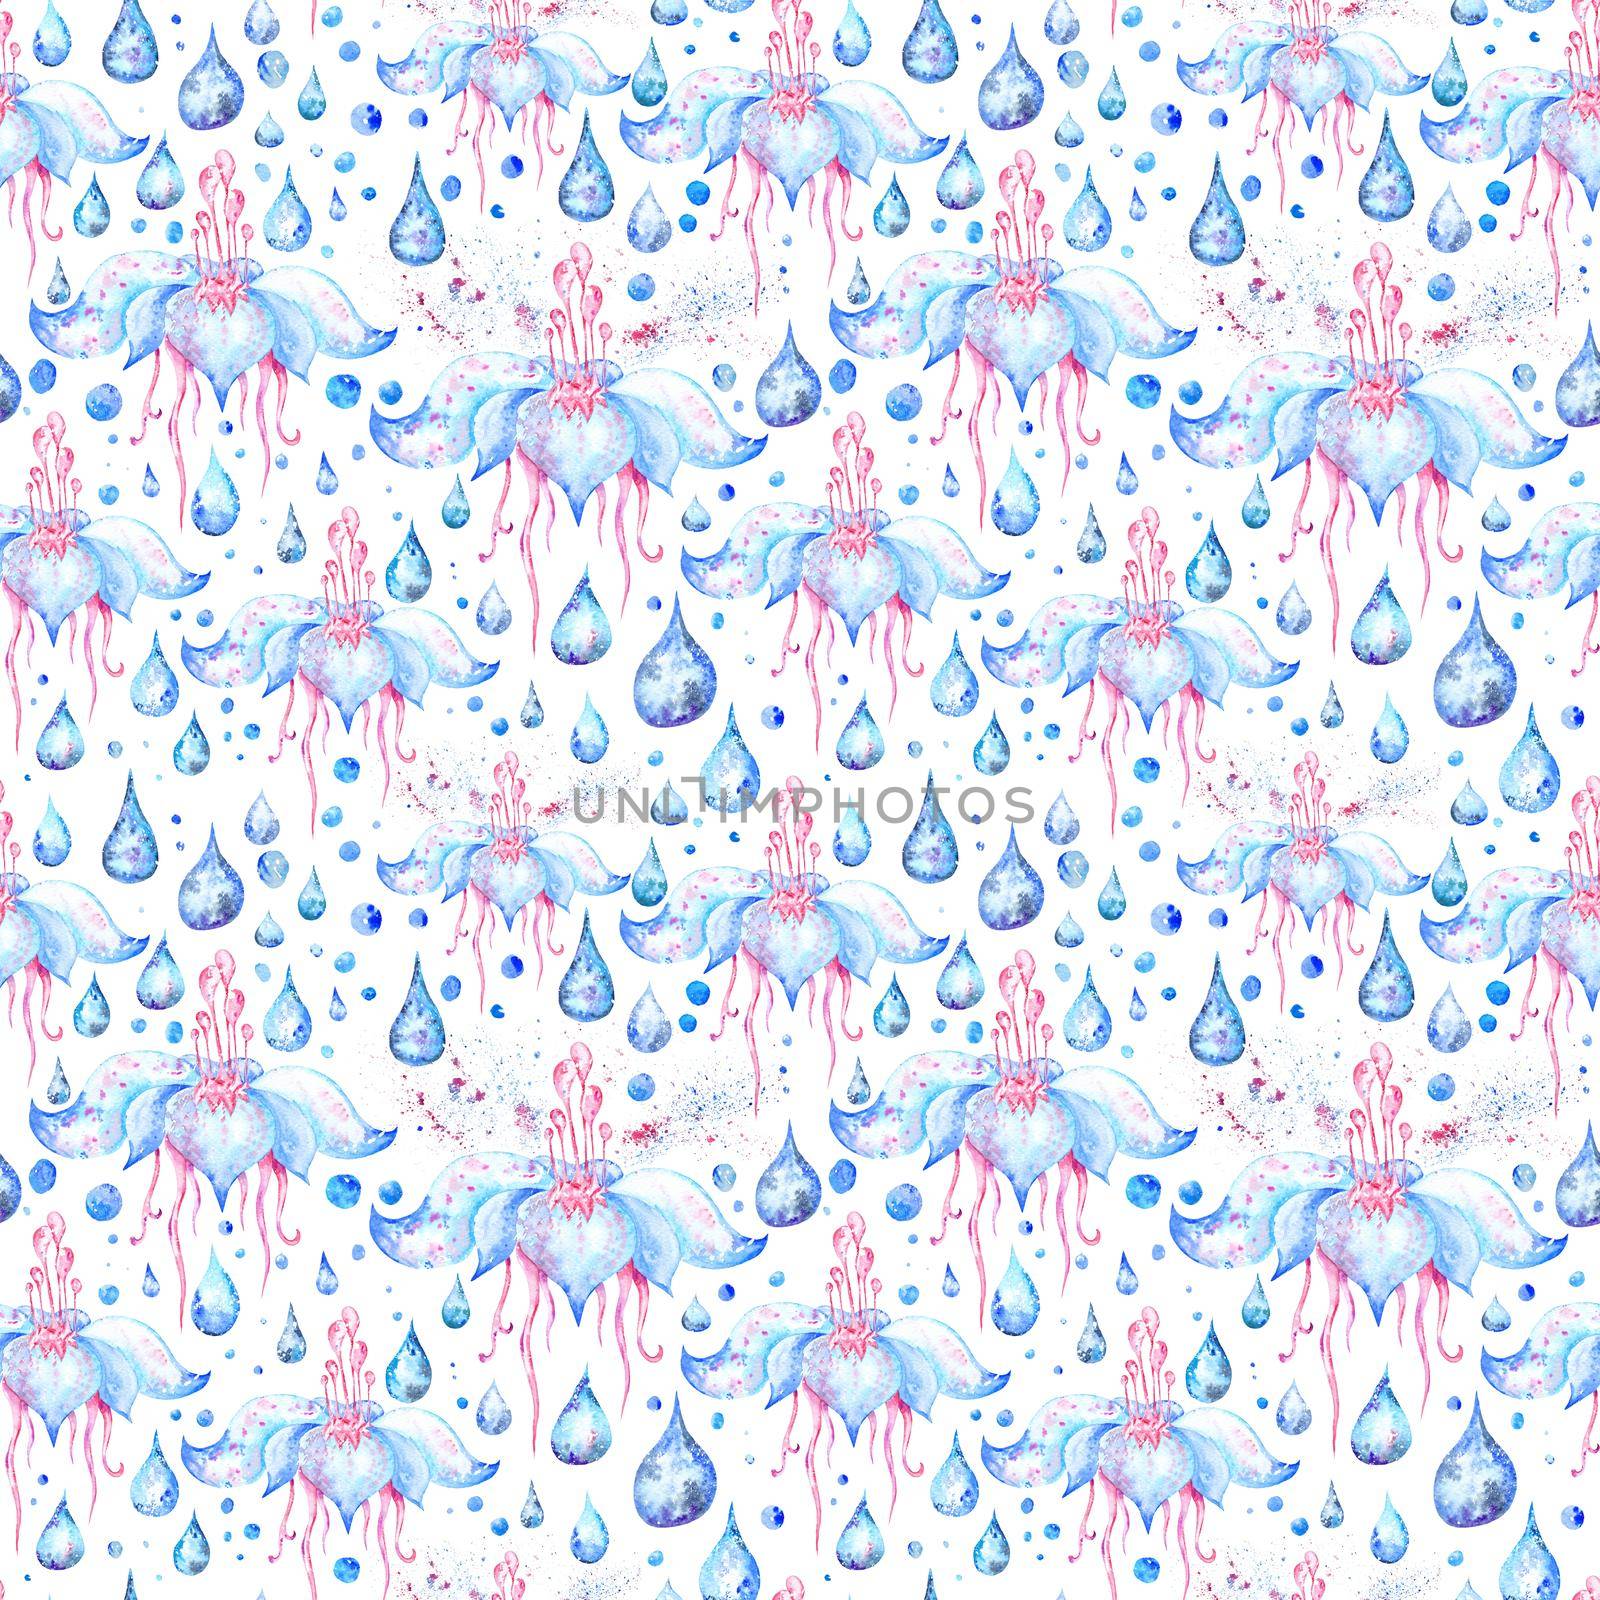 Watercolor seamless texture with lotus, water drops and color splash on white background